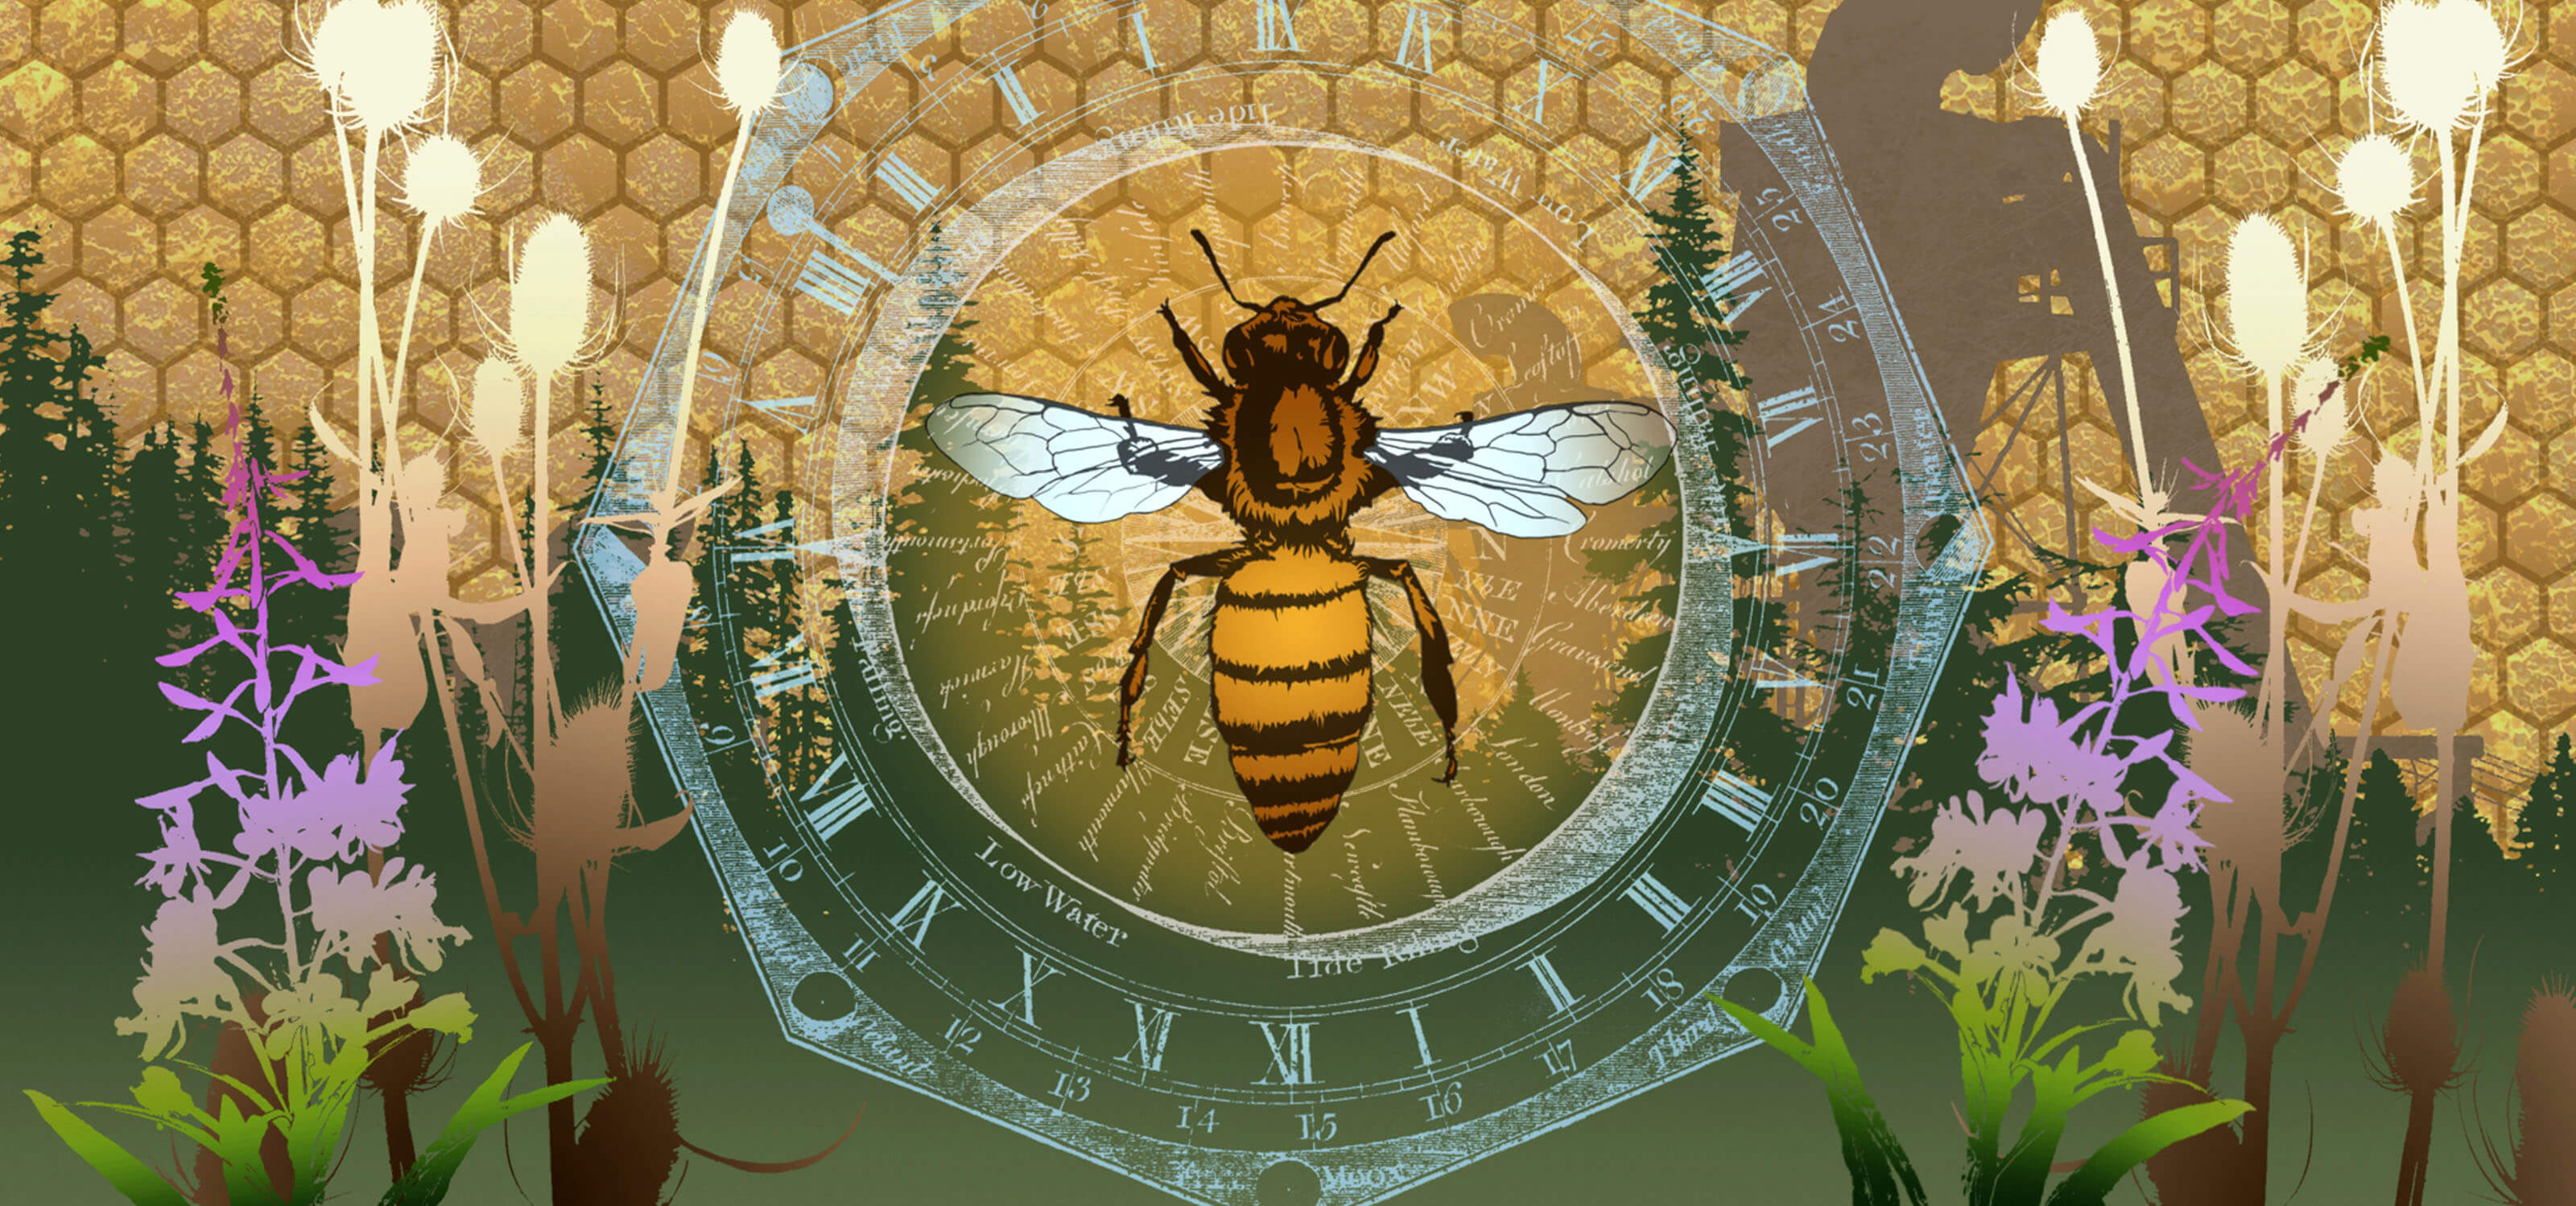 Digital composition of a bee and plants superimposed over a forest and honeycomb